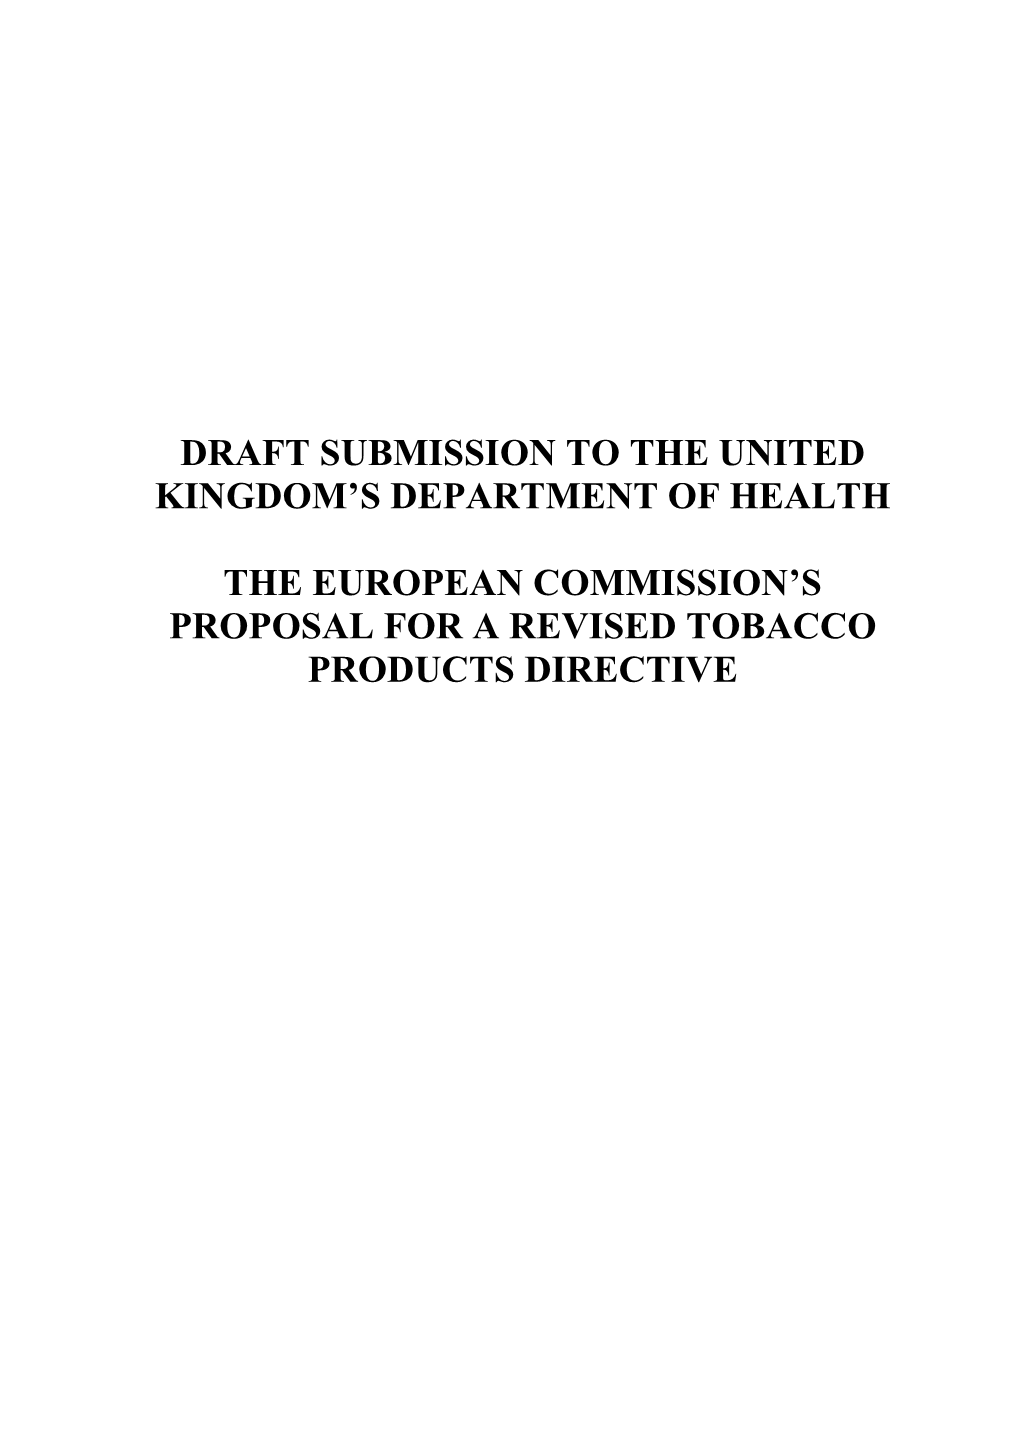 Draft Submission to the United Kingdom's Department of Health the European Commission's Proposal for a Revised Tobacco Prod